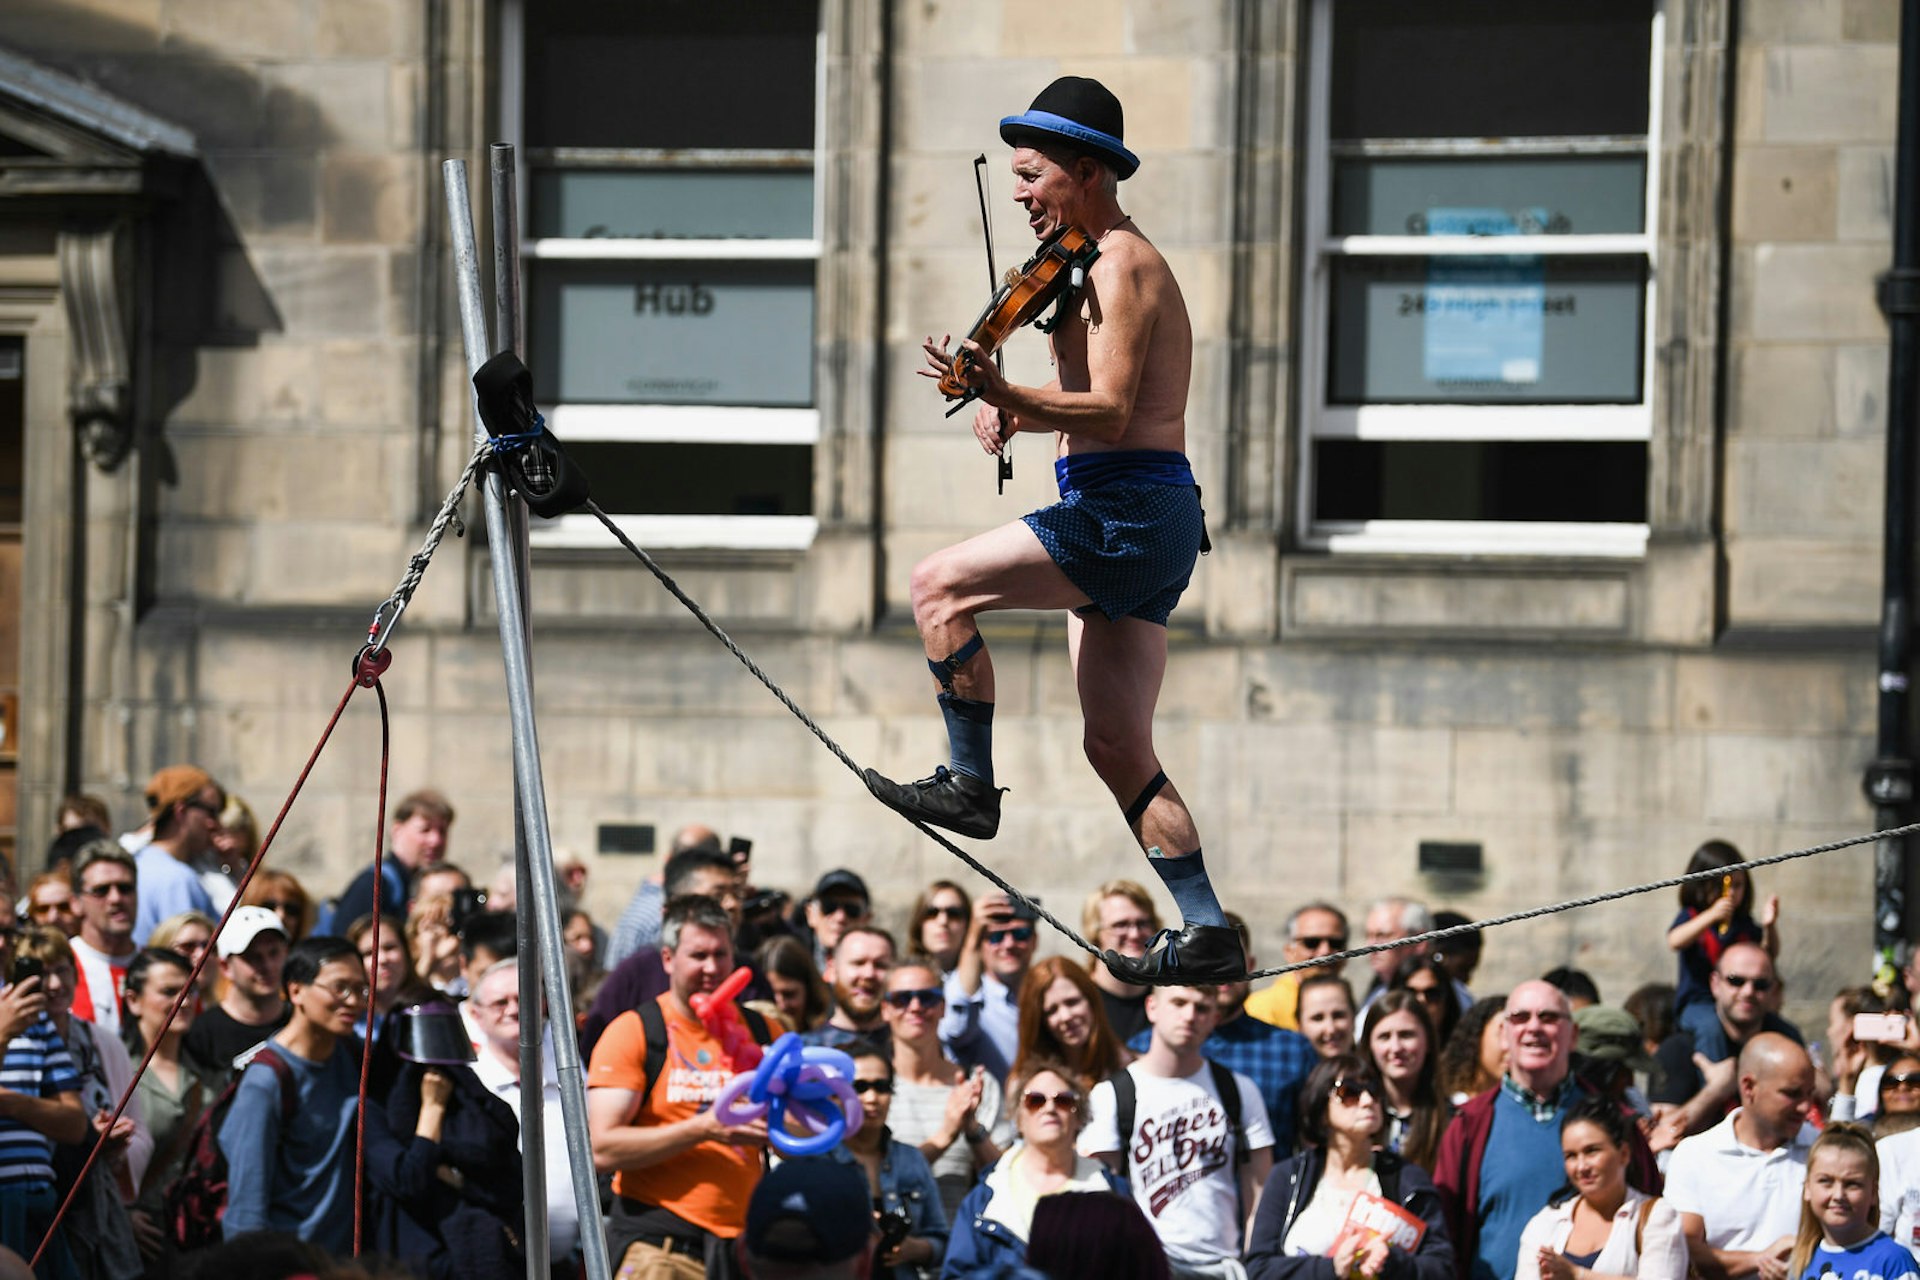 Edinburgh Festival Fringe entertainers perform on the Royal Mile. The Fringe is the largest performing arts festival in the world, with an excess of 30,000 performances of more than 2000 shows. A man is walking along a high line wearing shorts and a bowler hat while playing a violin. A huge crowd is gathered around to watch. 